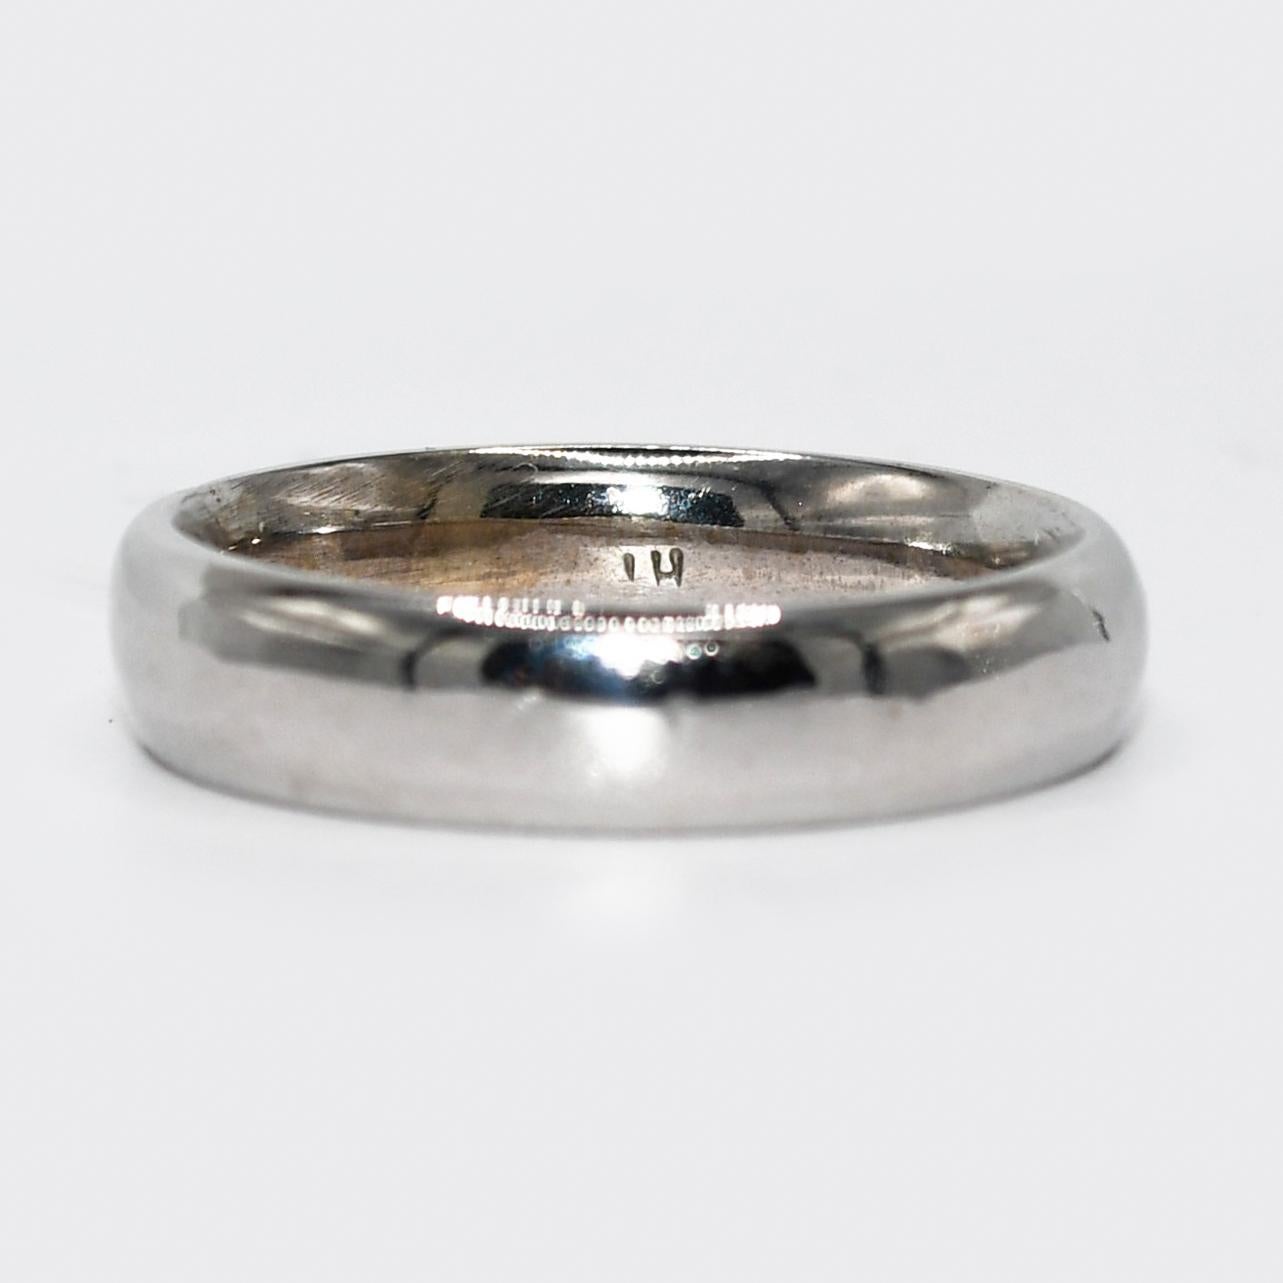 14K White Gold Wedding Band Ring, 6.2g
Men's 14k white gold wedding band.
Tests 14k and weighs 6.2 grams.
Comfort fit style. 5mm wide.
Ring size is 8 1/2 and can be sized, up or down, one full size or less for an extra fee.
Very good condition.